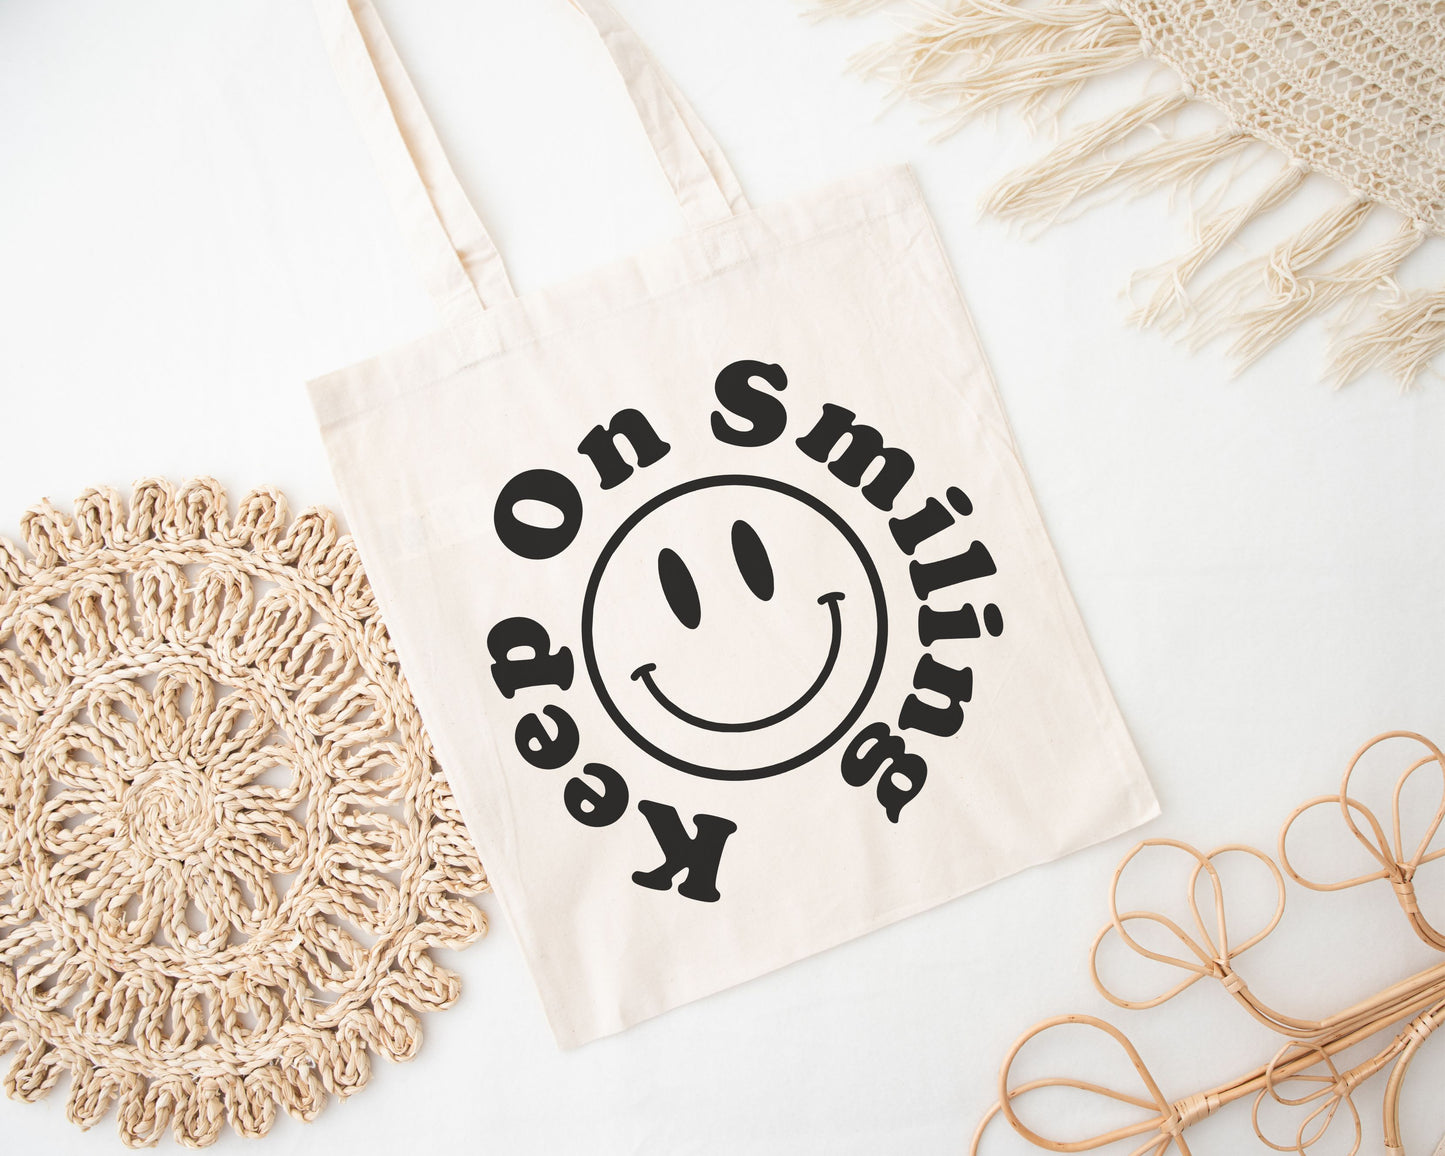 Keep on Smiling Canvas Tote Bag, Funny Sayings Tote Bag, Retro '90's Y2K Smiley Face Everyday Tote Bag, Happy Face Reusable shopping Bag